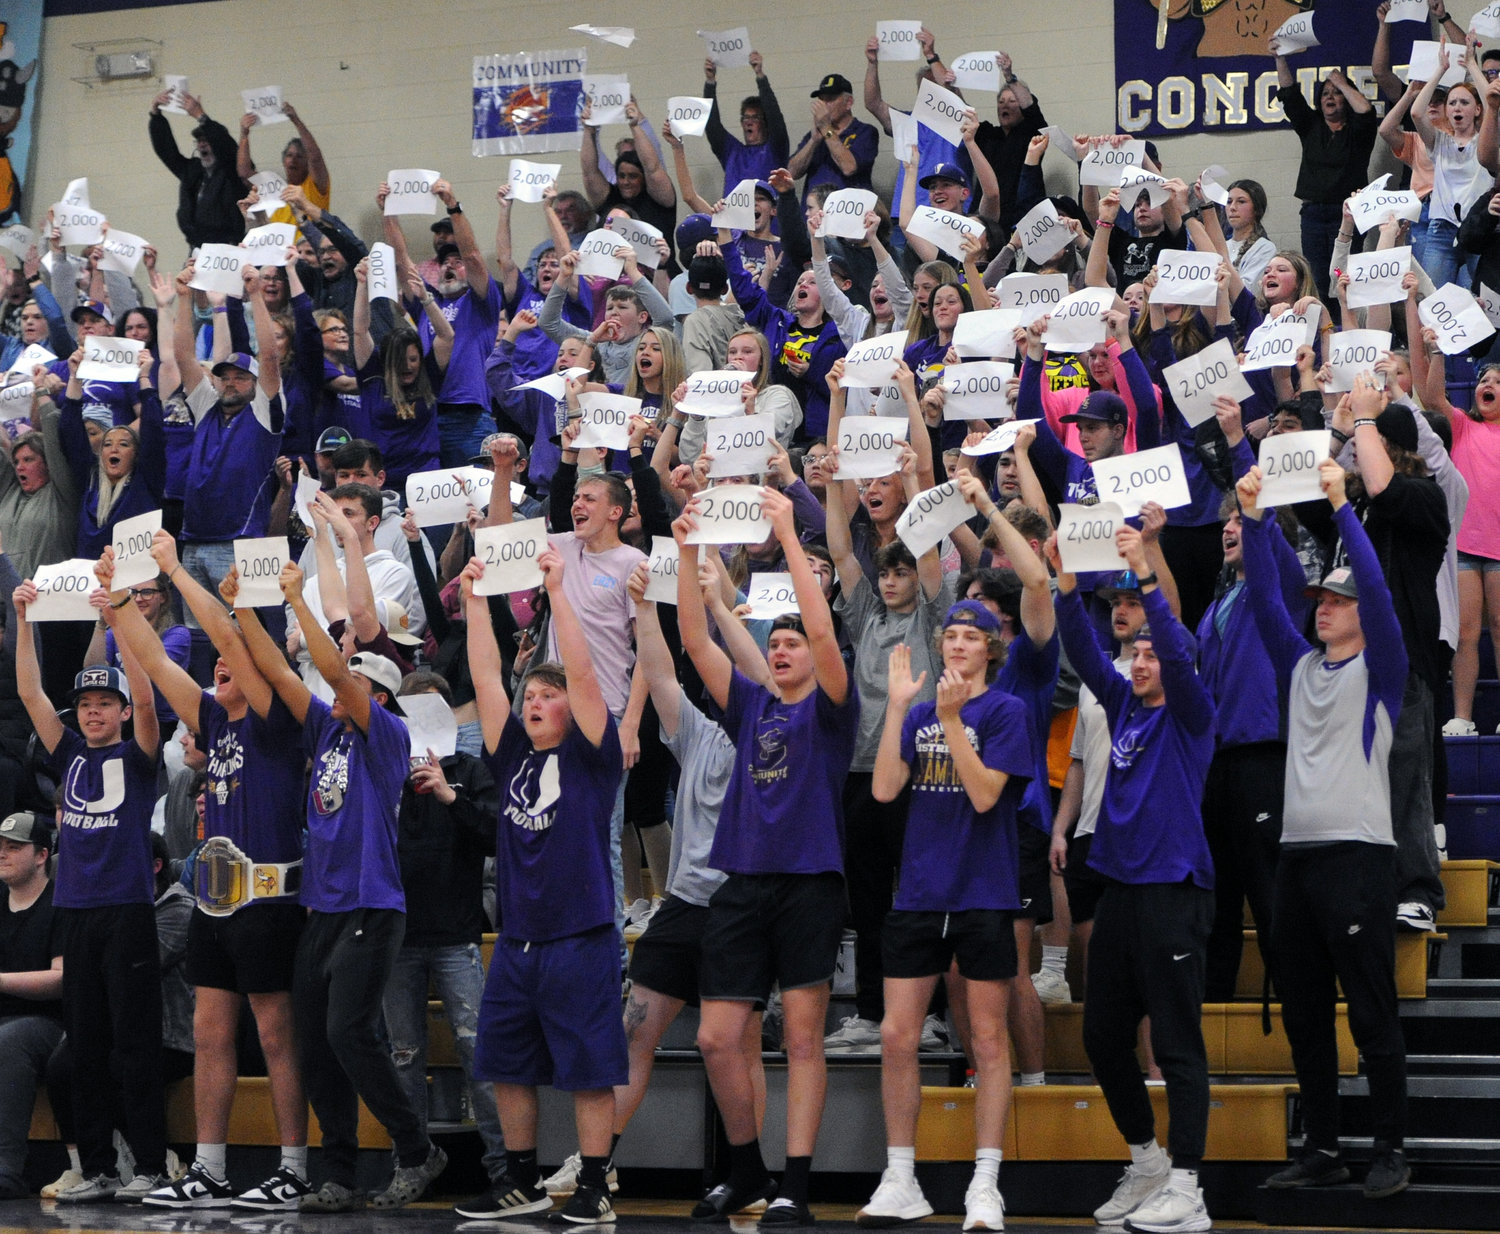 The Viqueen student section erupts and celebrates with 2,000-point signs to honor Simmons’ benchmark.